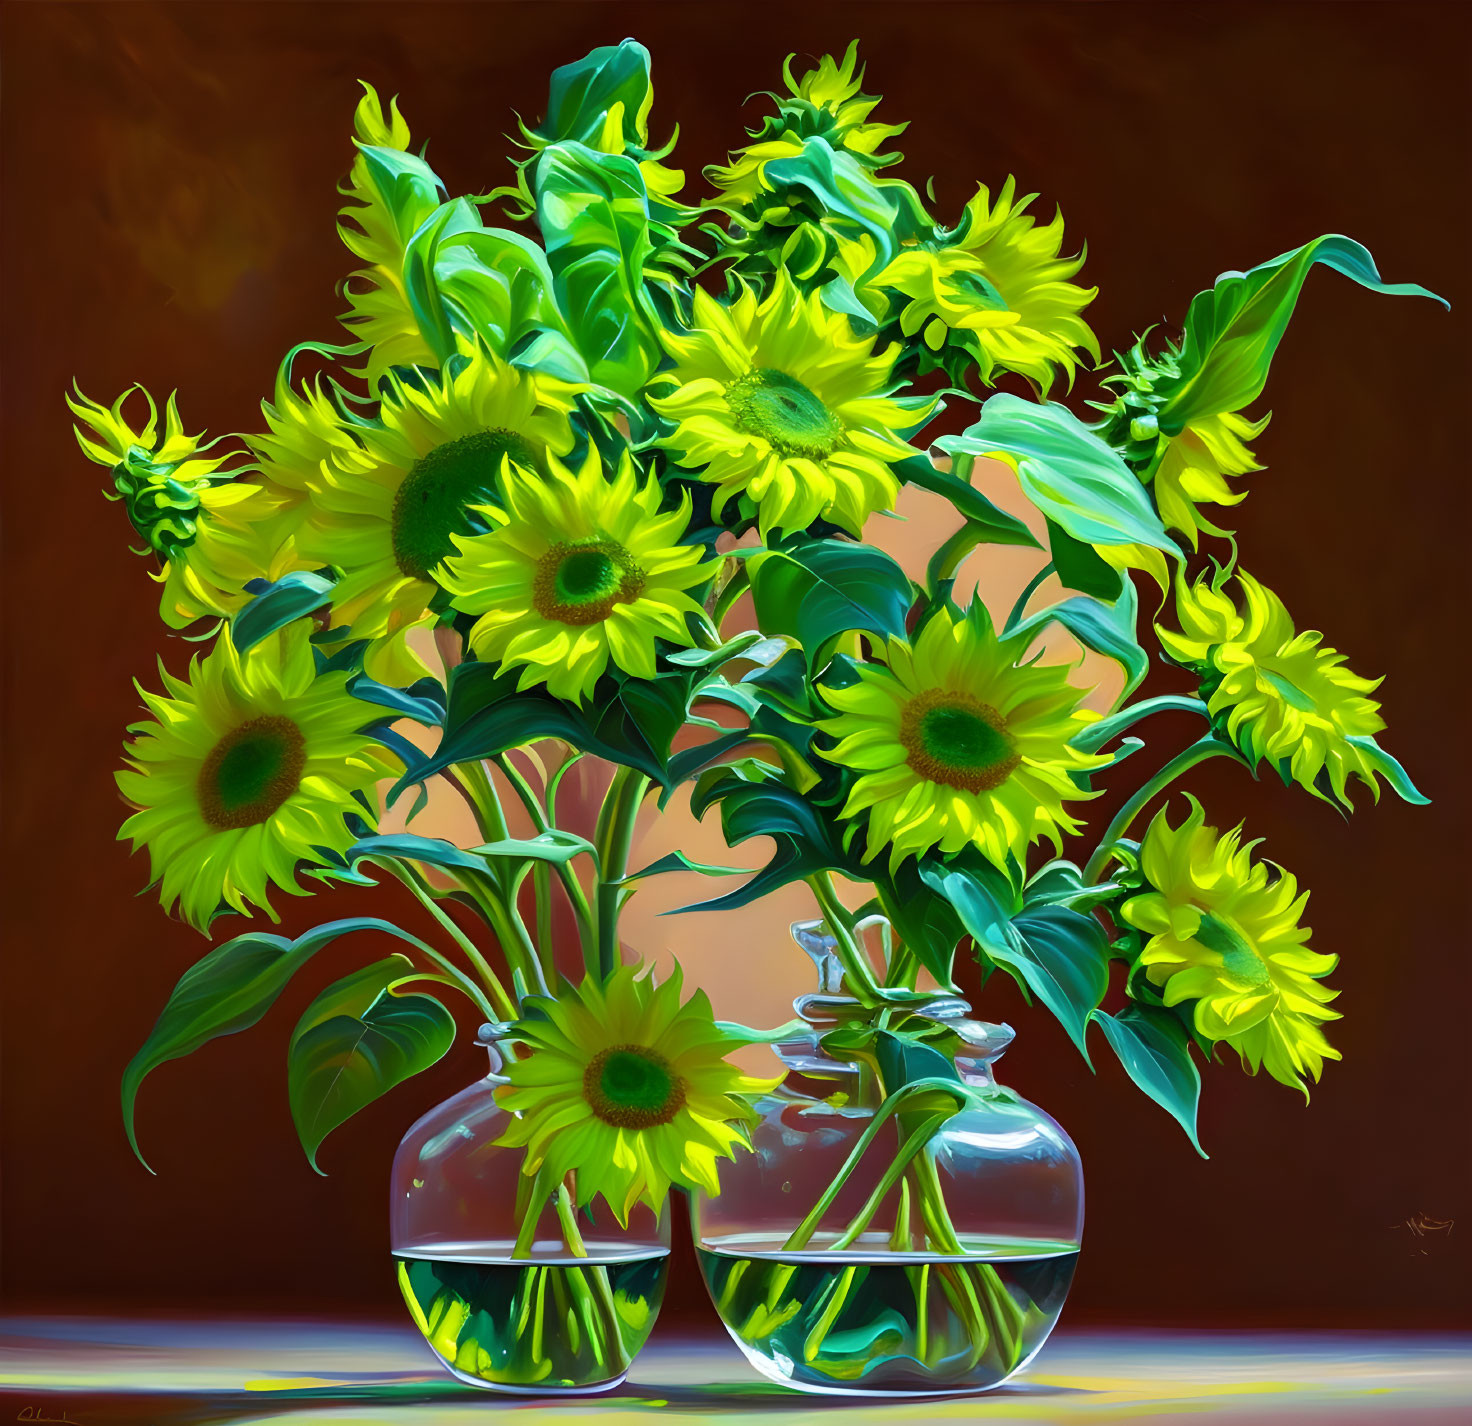 Oil painting Green Sunflowers